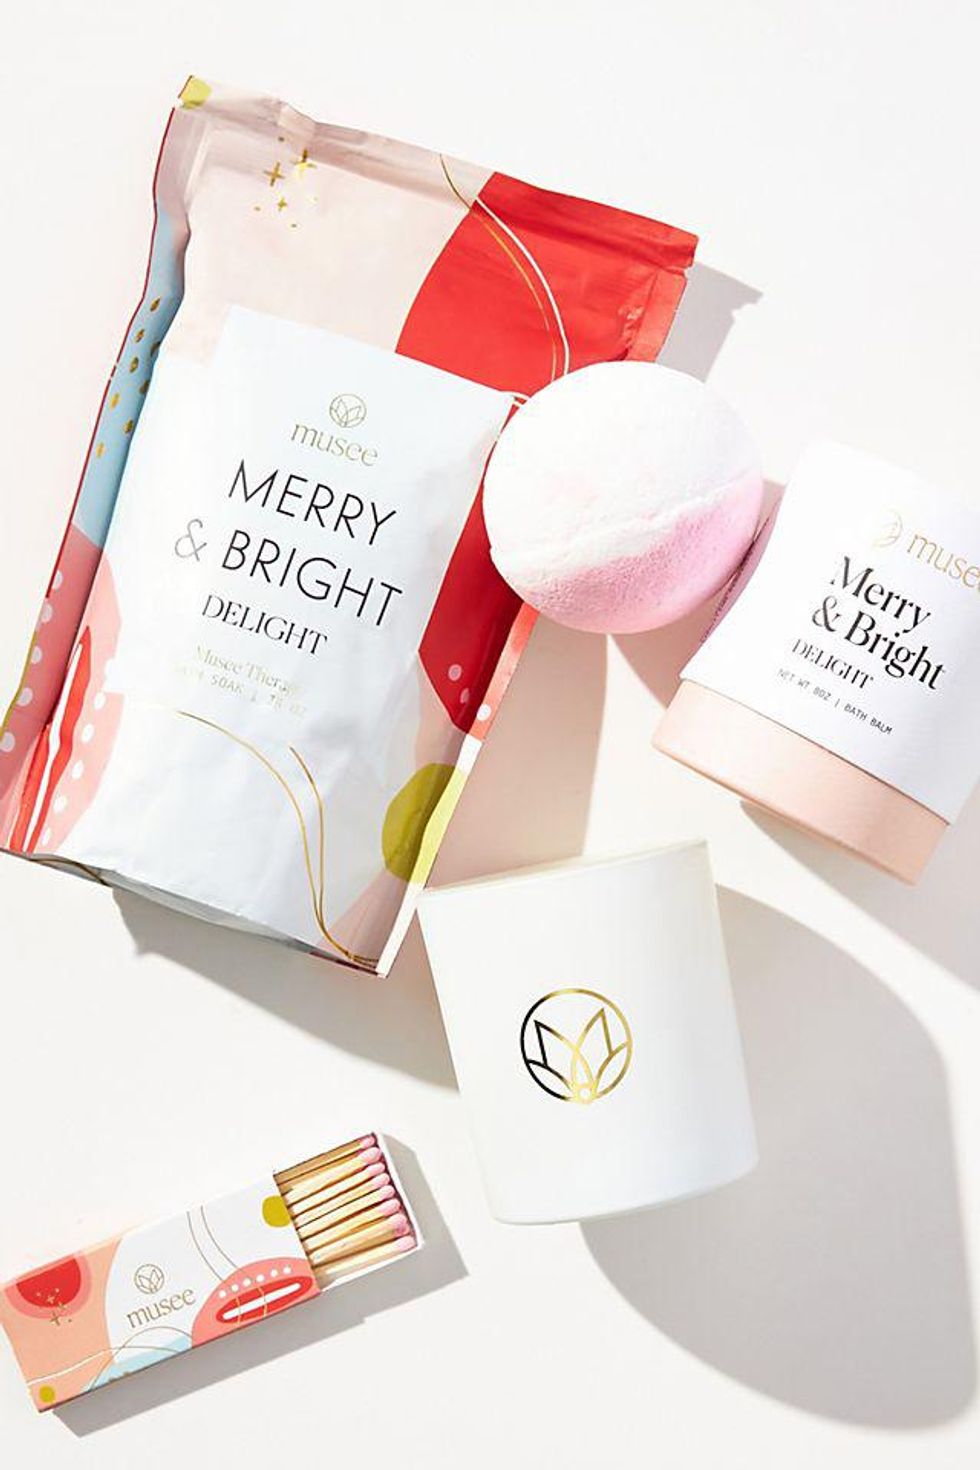 Musee Merry & Bright Holiday Bath Gift Set